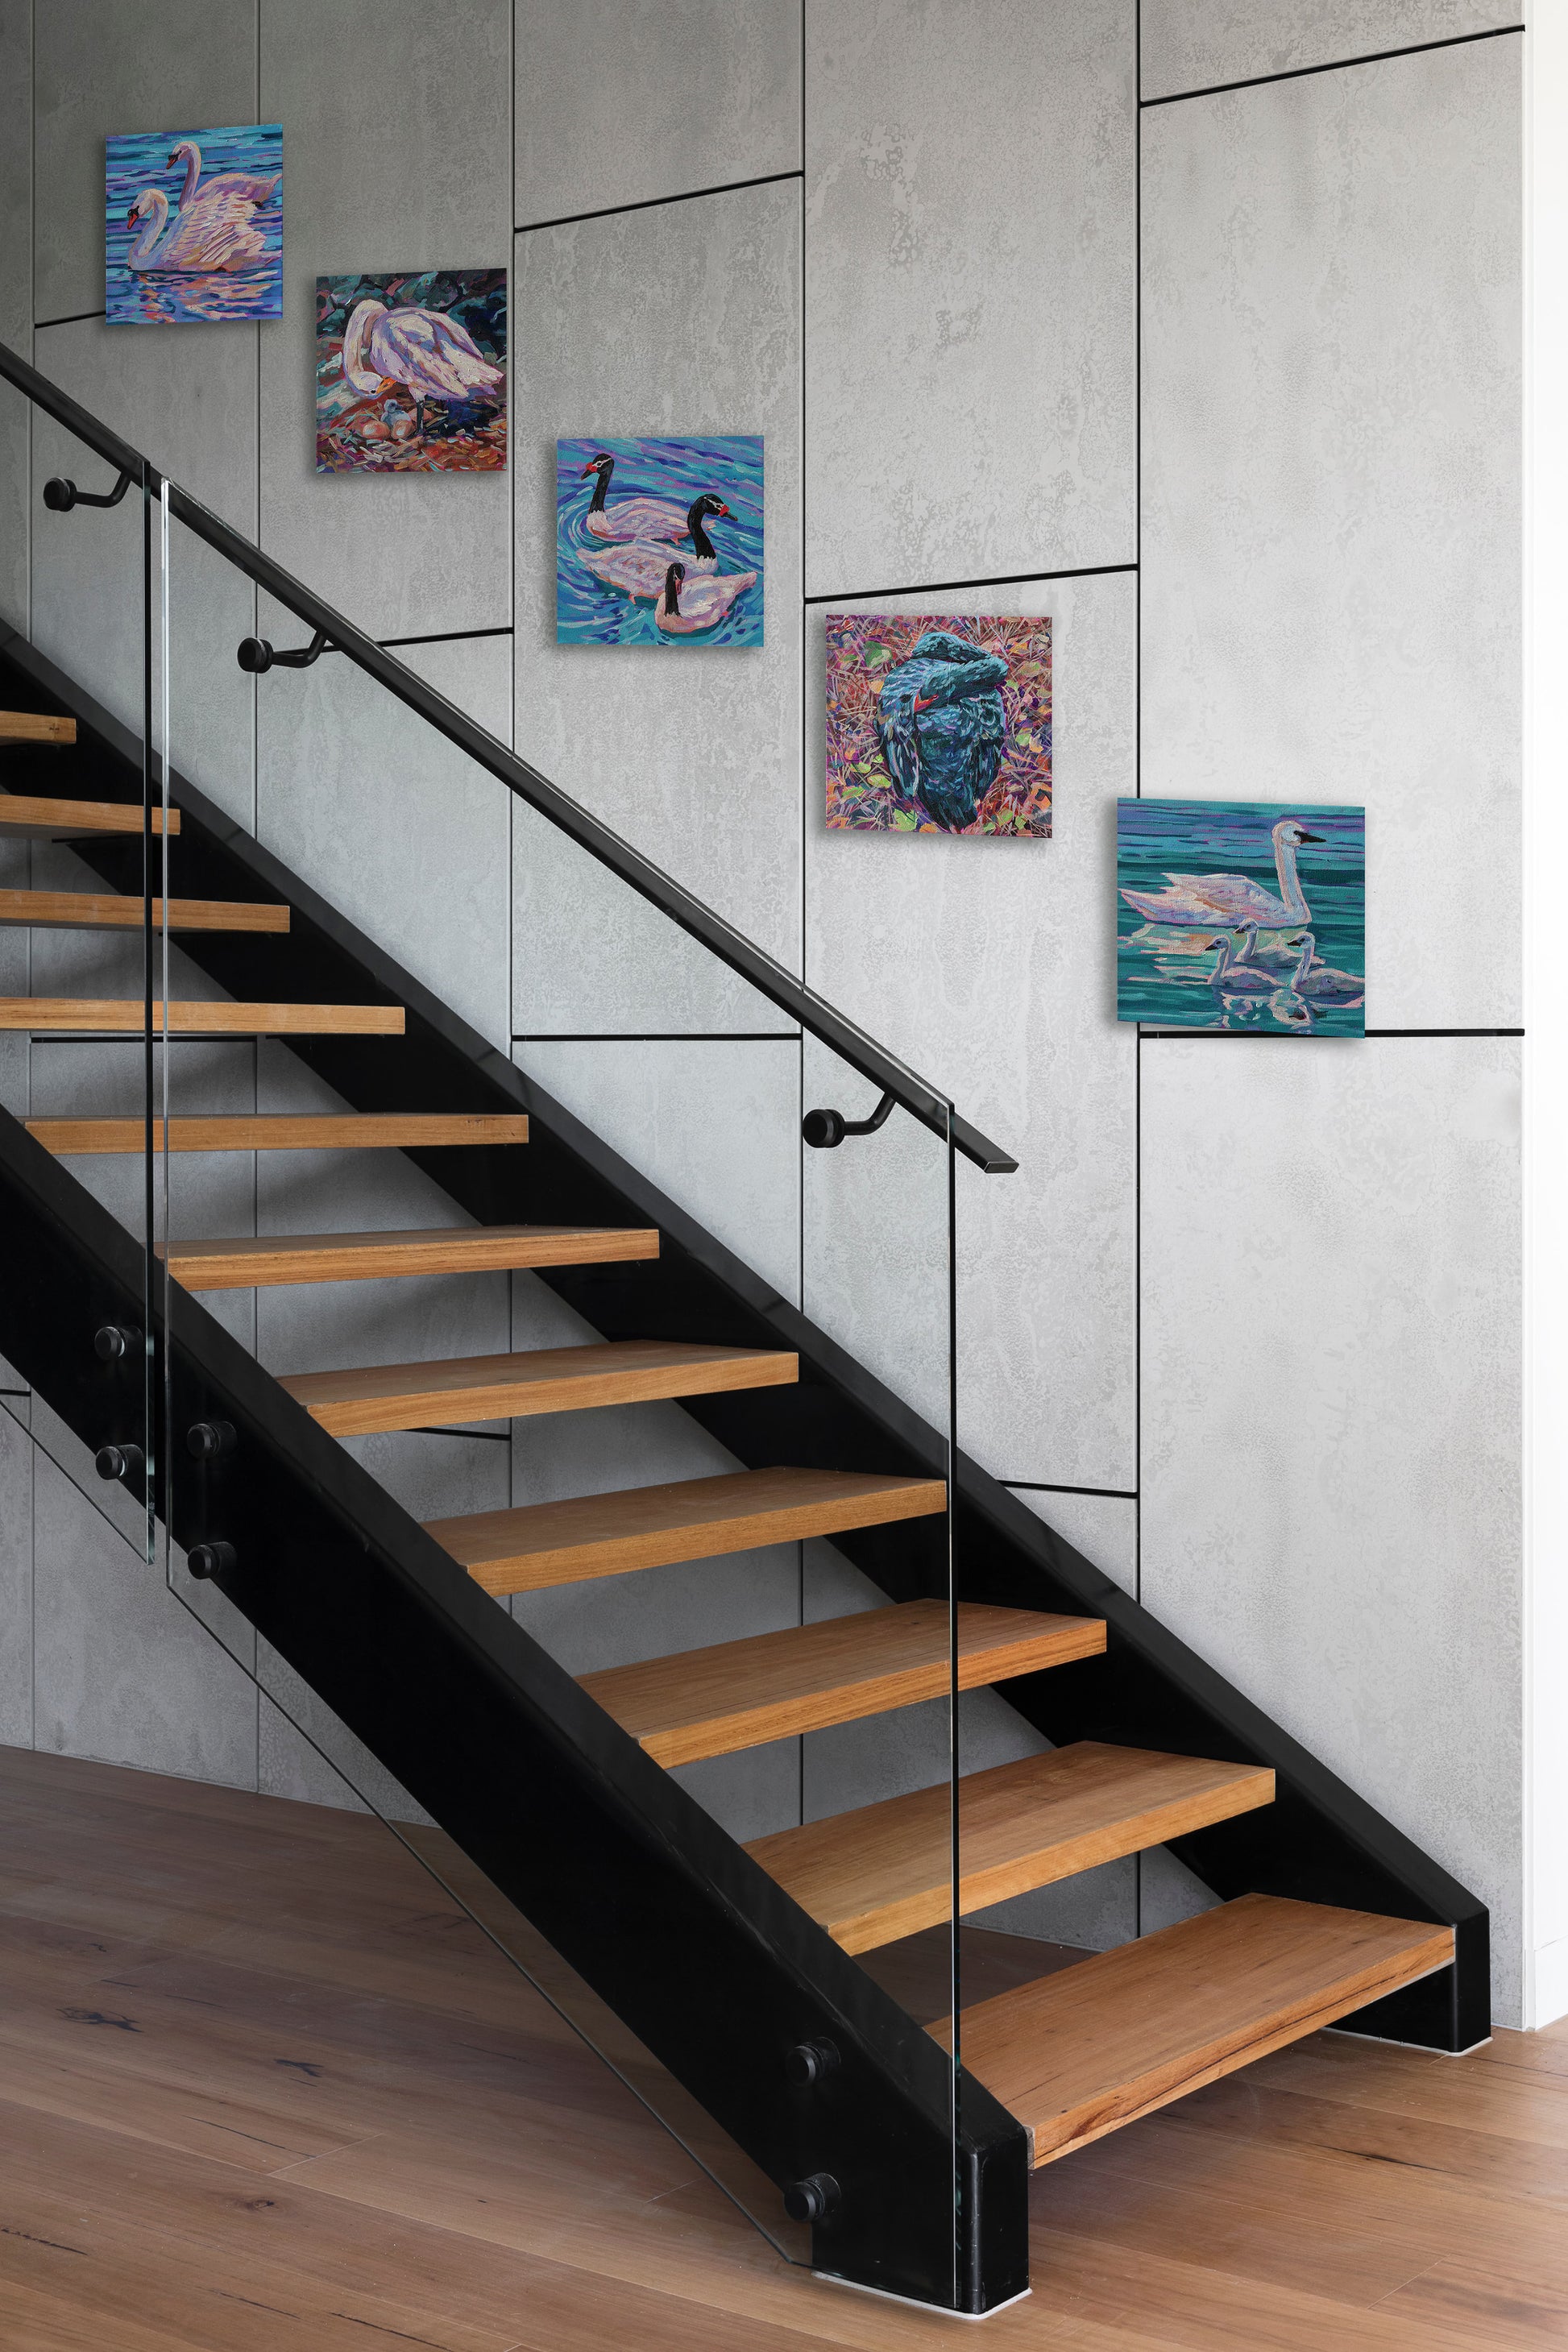 5 swan paintings with staircase